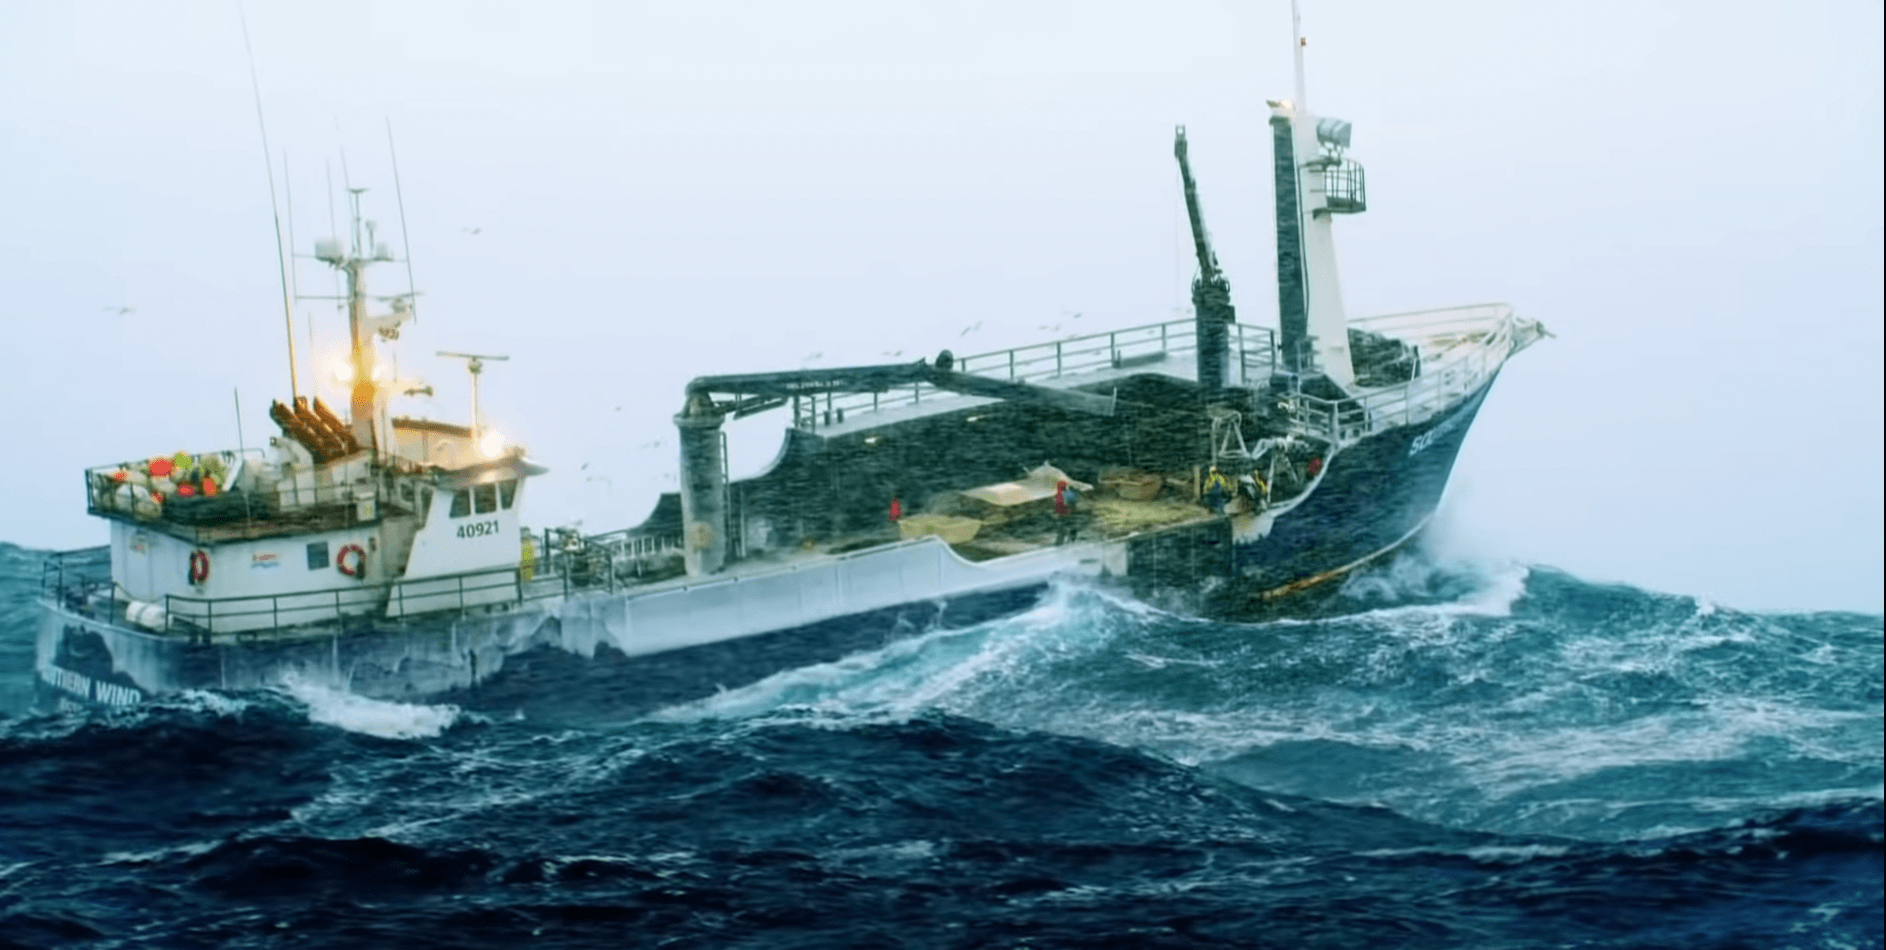 The Southern Wind in 'Deadliest Catch' on the Bering Sea